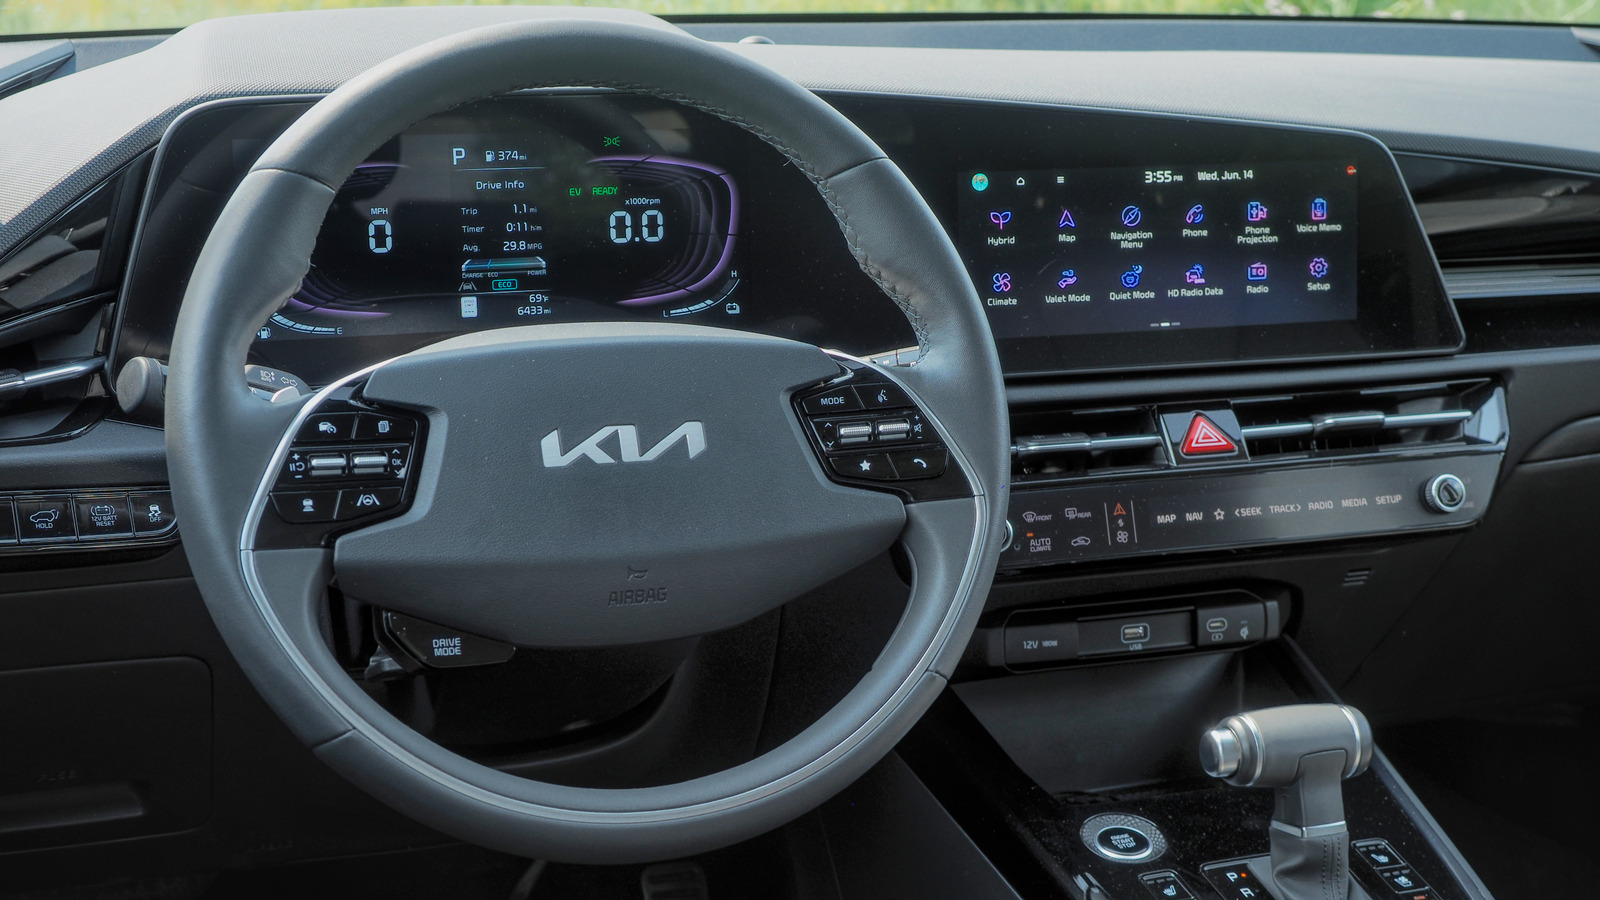 This Kia Cabin Feature Is Genius All Automakers Should Steal – SlashGear